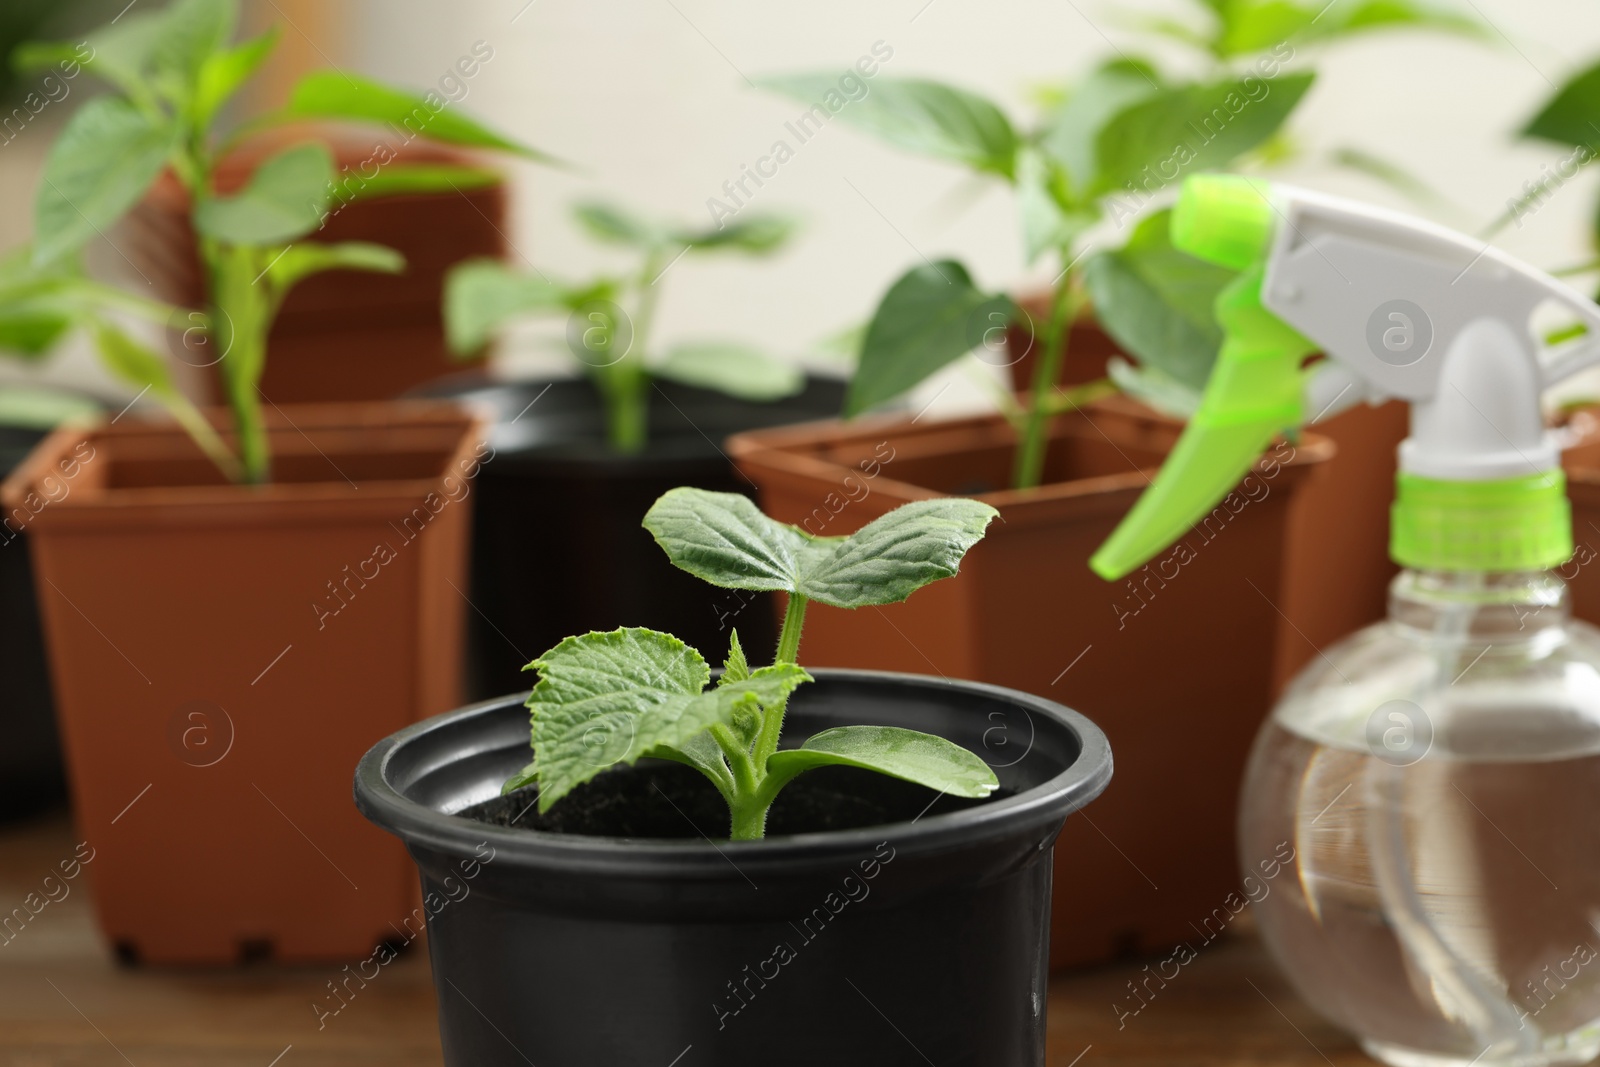 Photo of Seedlings growing in plastic containers with soil on table, closeup